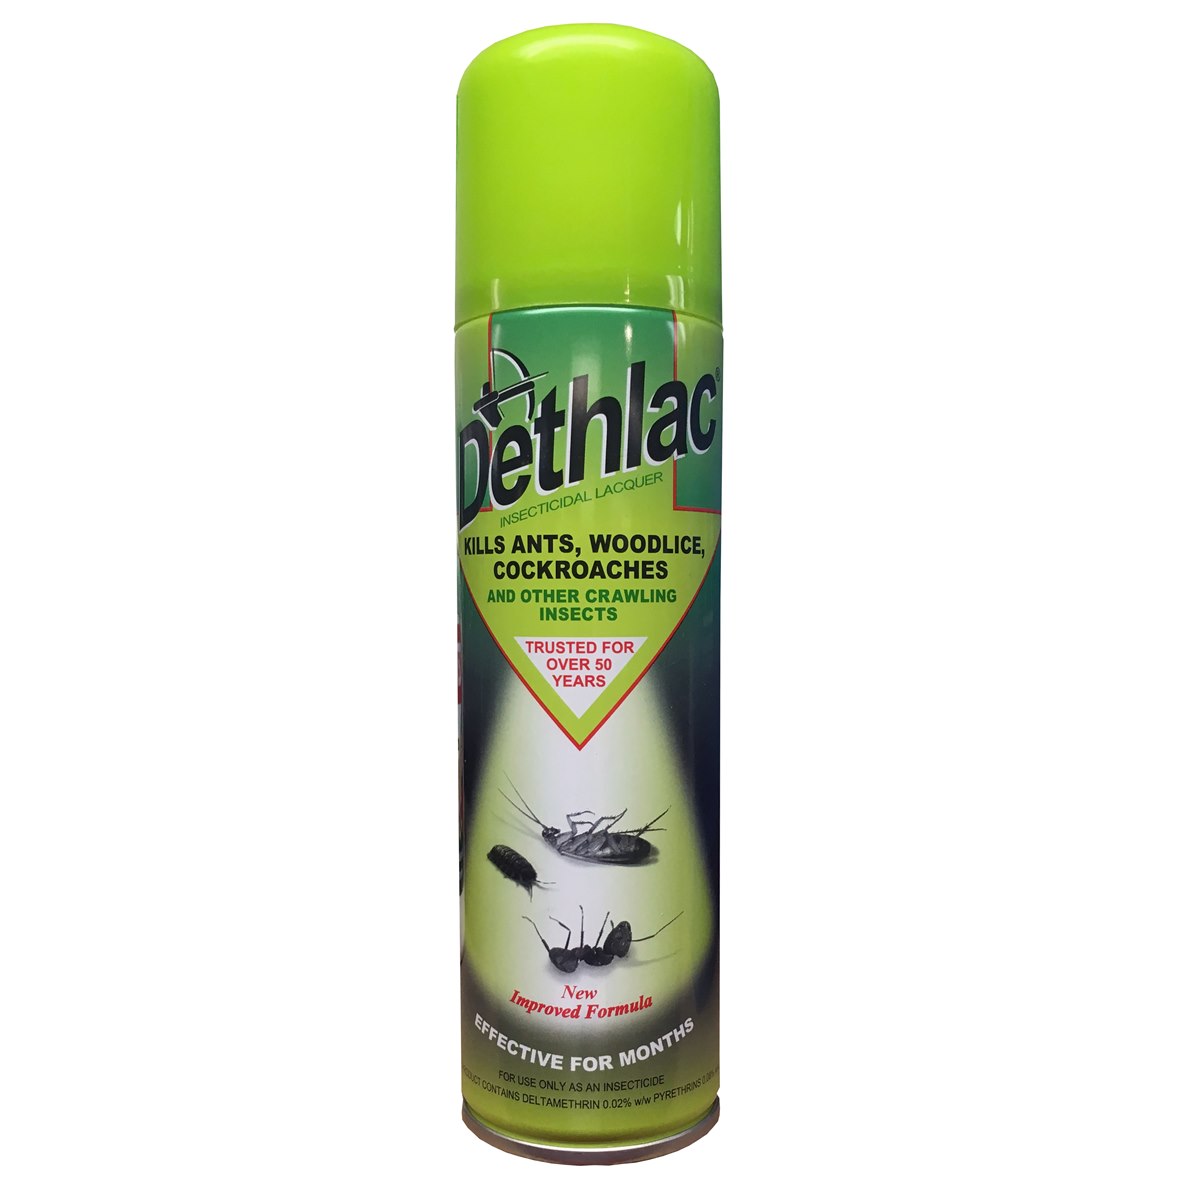 Dethlac Insect Killer Lacquer Spray 250ml